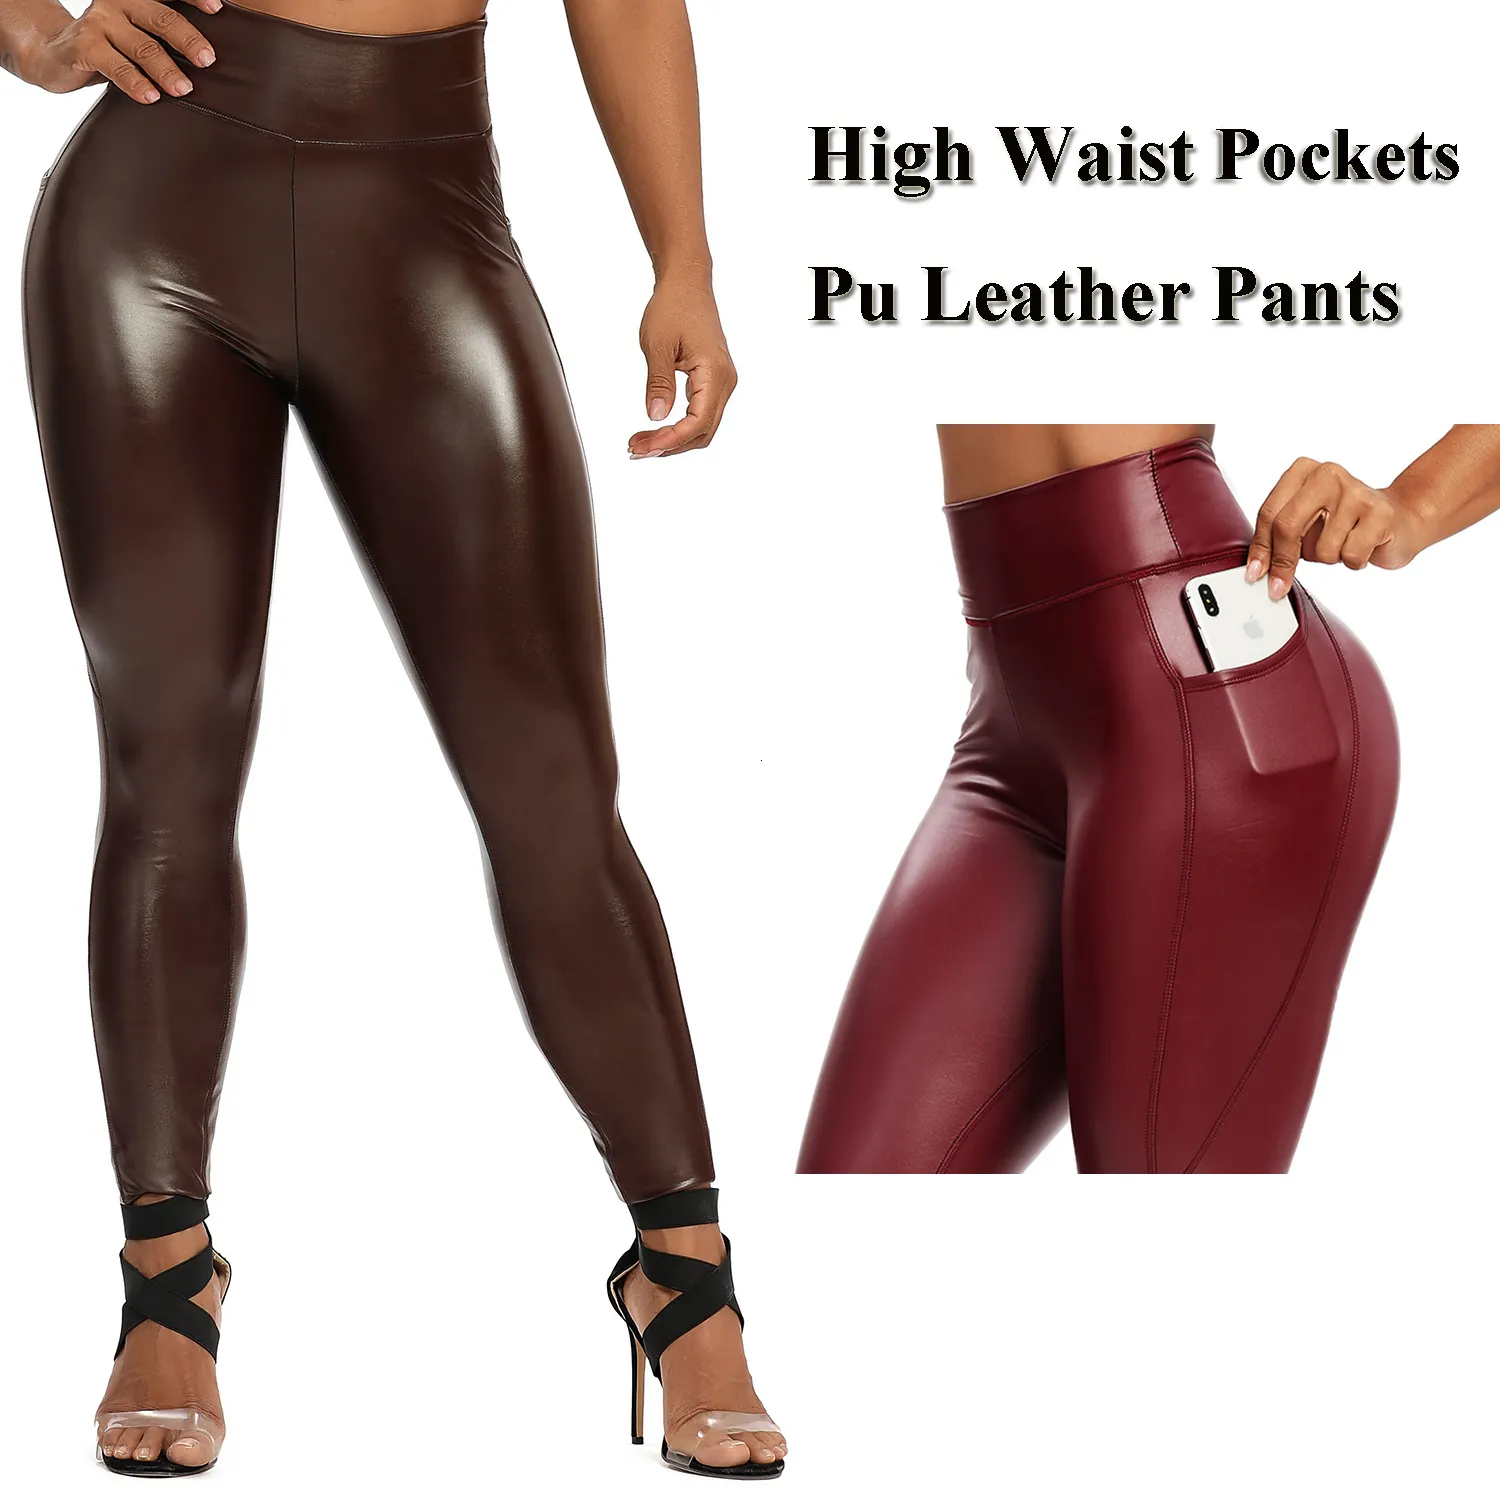 Winter Black Leather Skinny Maternity Leather Leggings With High